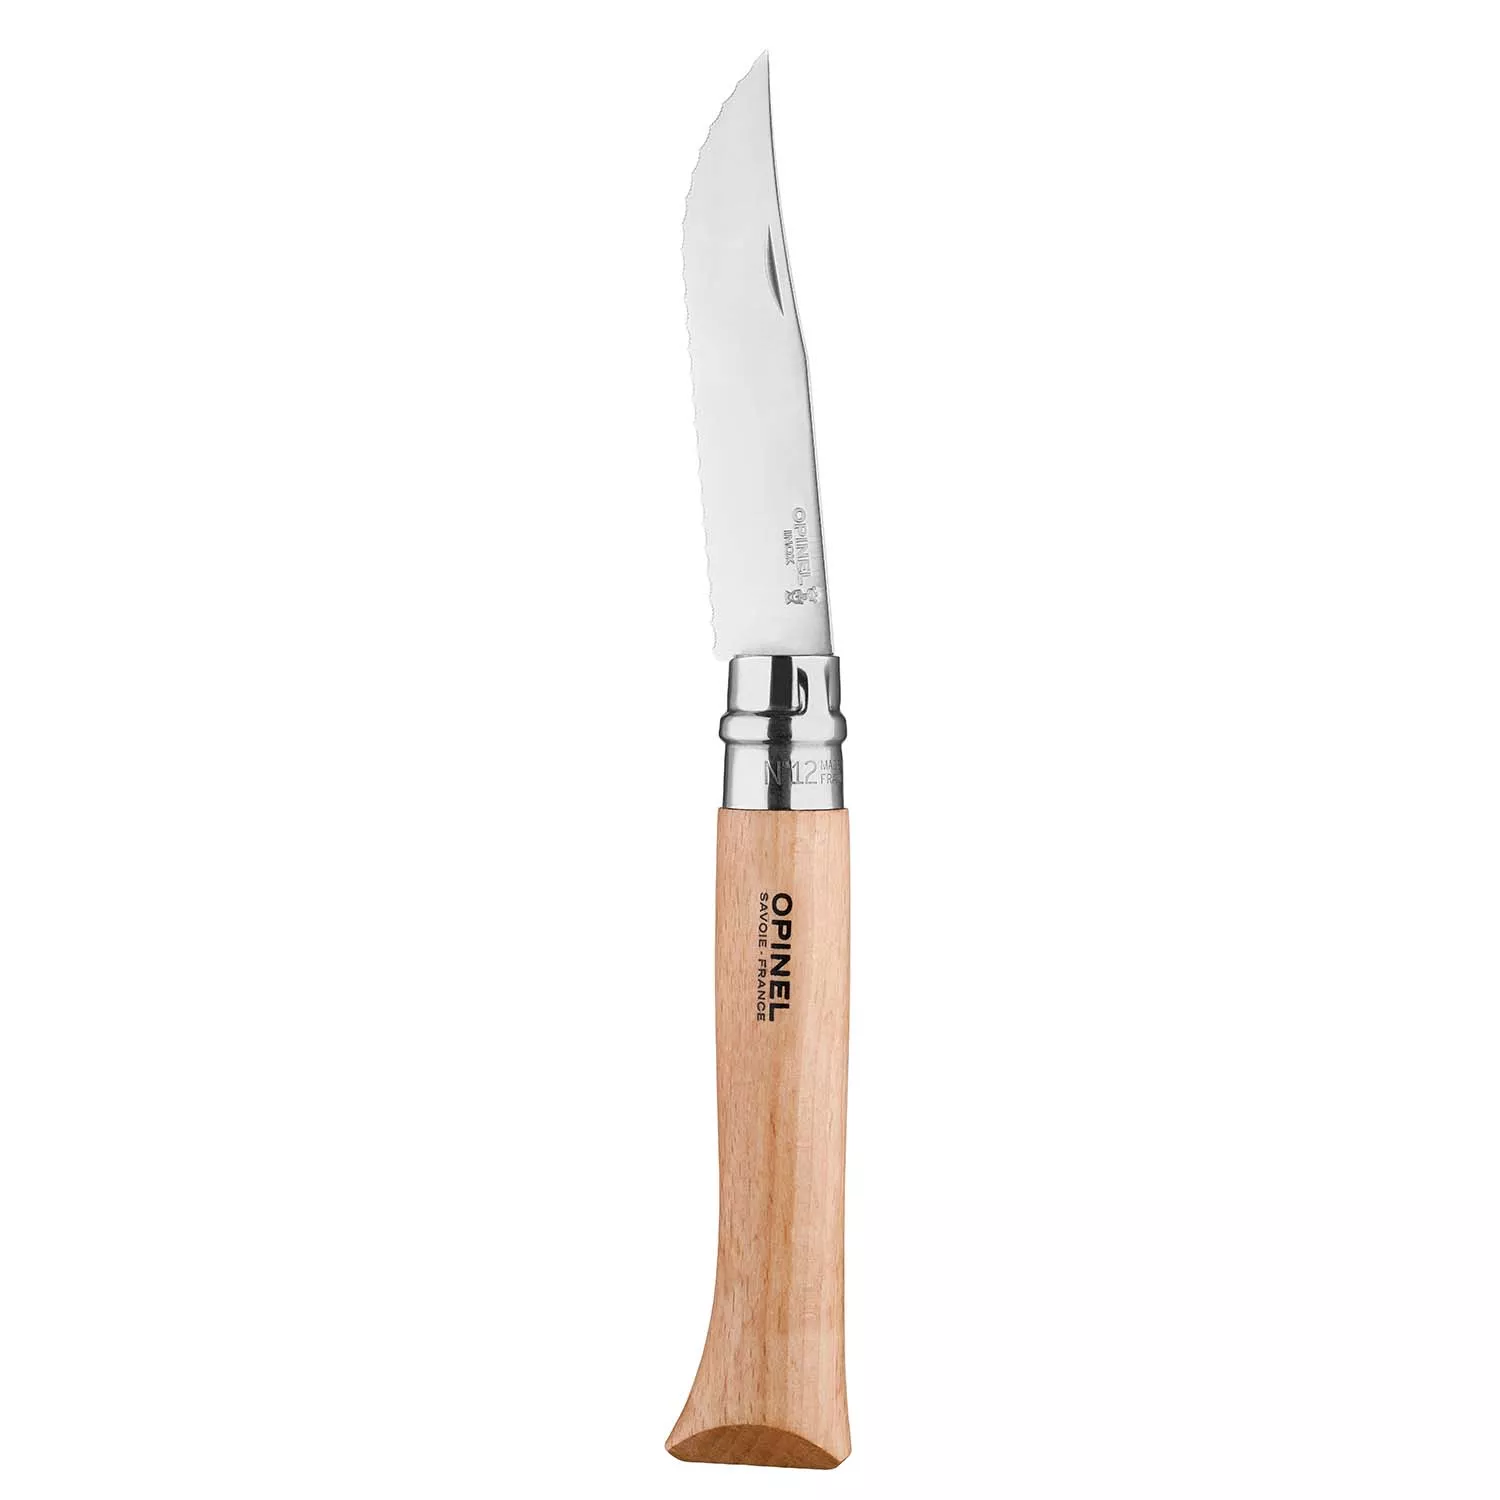 Opinel Nomad Camping Kitchen Utensil Kit, Includes No.12 Serrated Knife,  No. 10 Corkscrew Knife, No. 6 Peeler, Cutting Board